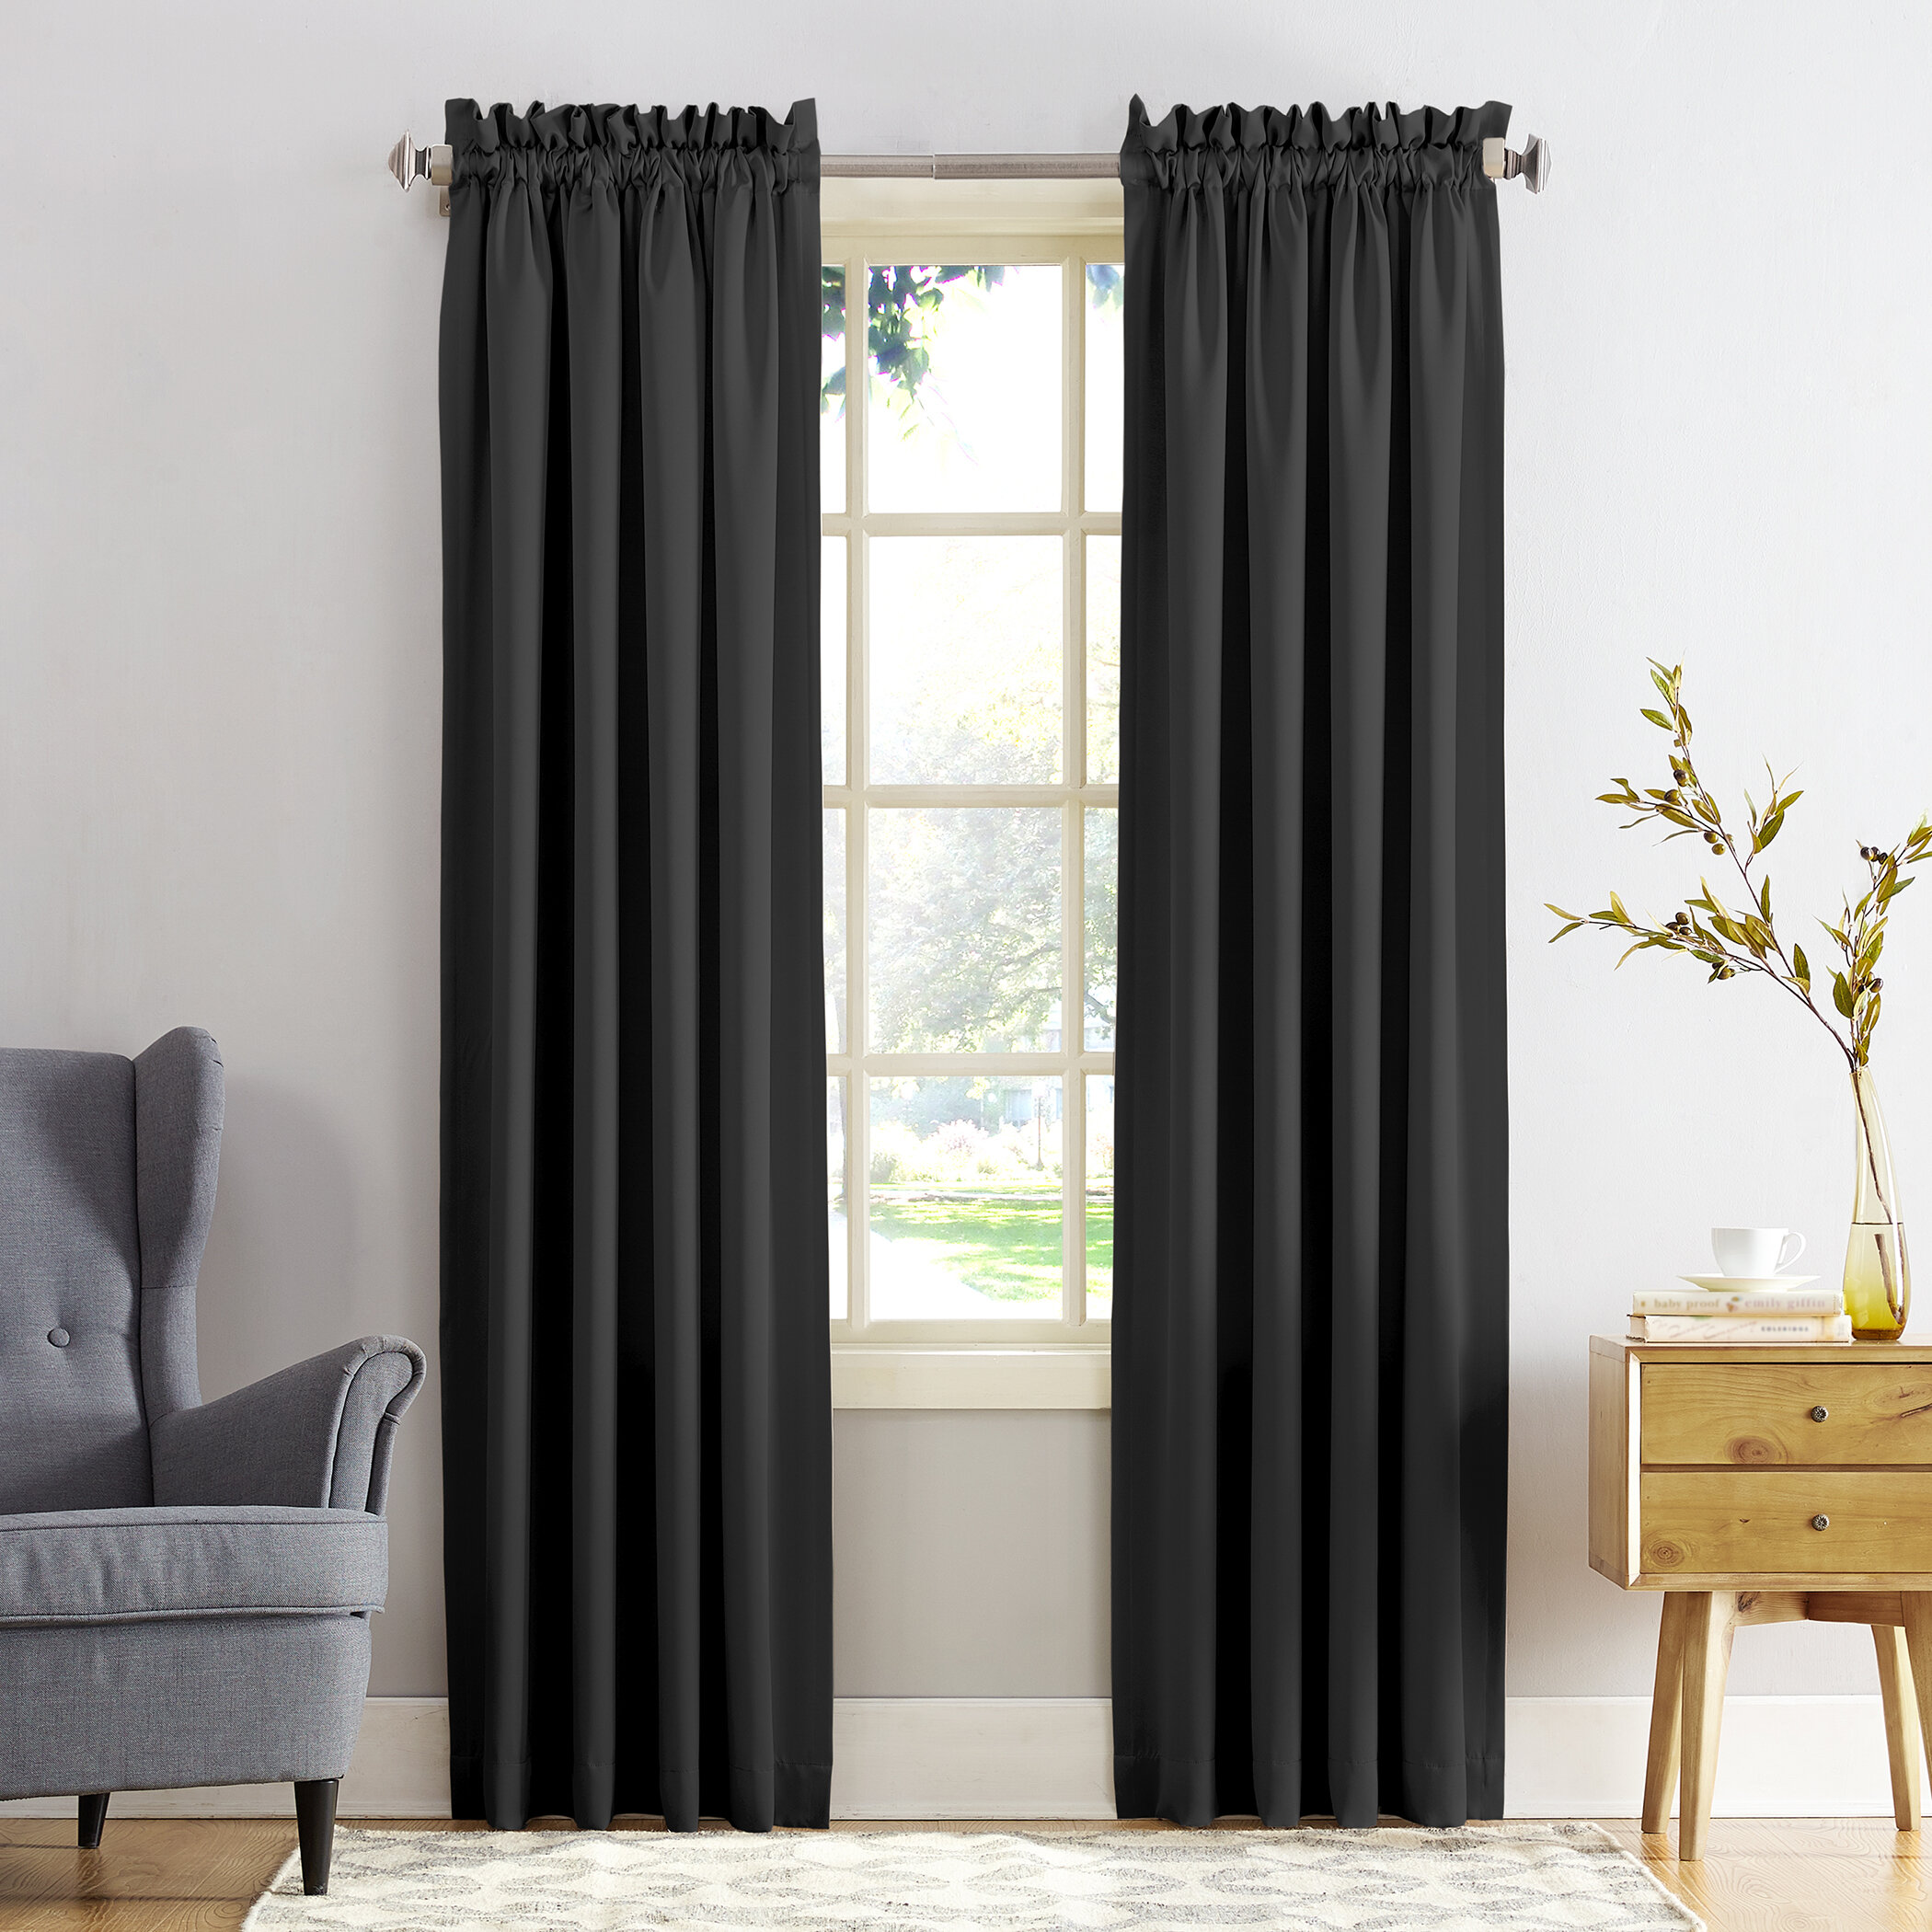 42x63-inch 2 Panels Black Turquoize Full Blackout Room Darkening Thermal Insulated Grommet Window Curtain for Living Room 